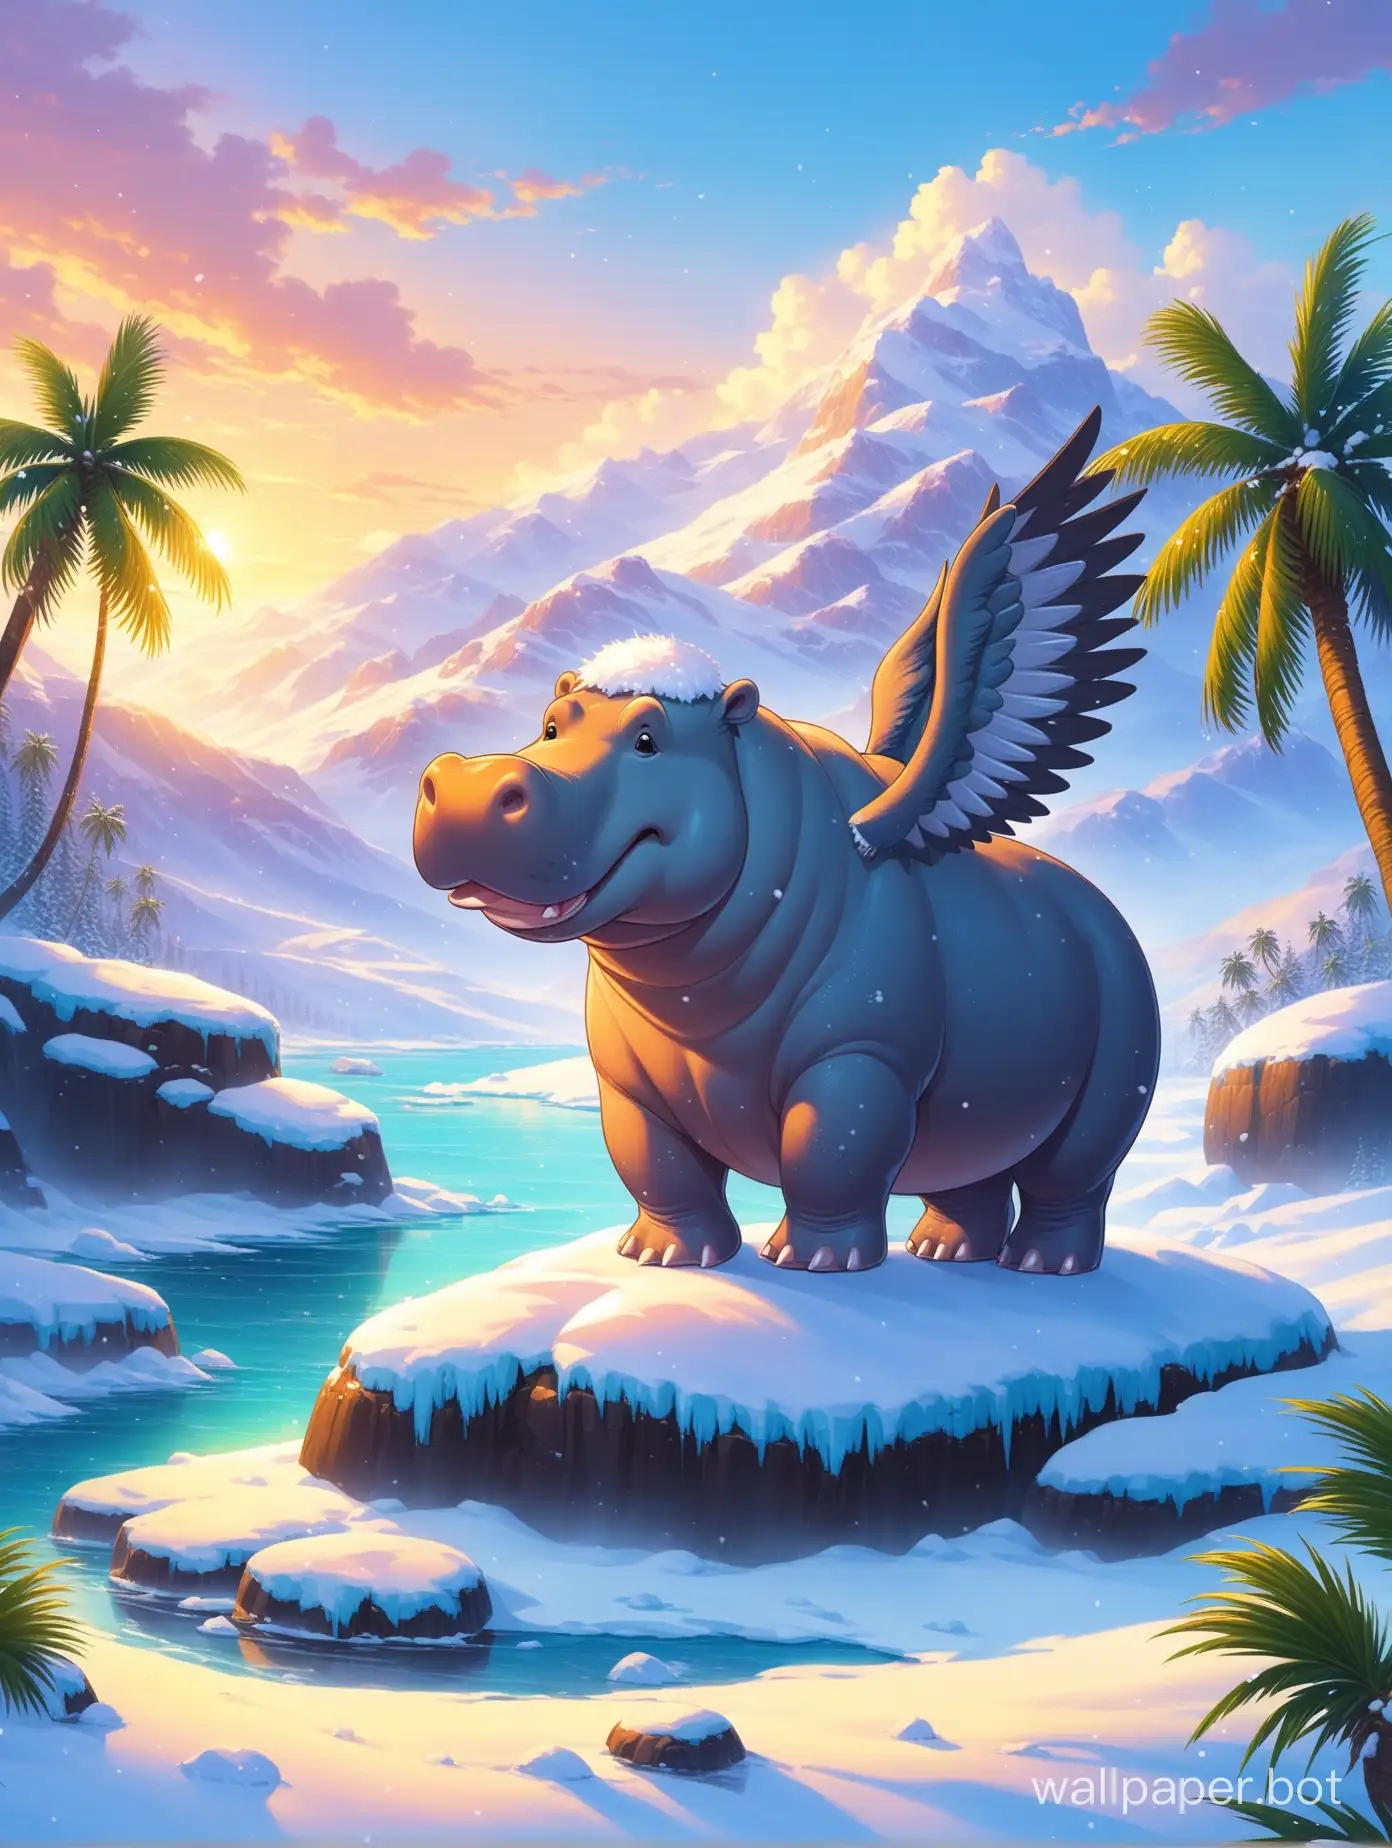 polar hippopotamus with wings
 coconut palm
In the rocks under the snow
